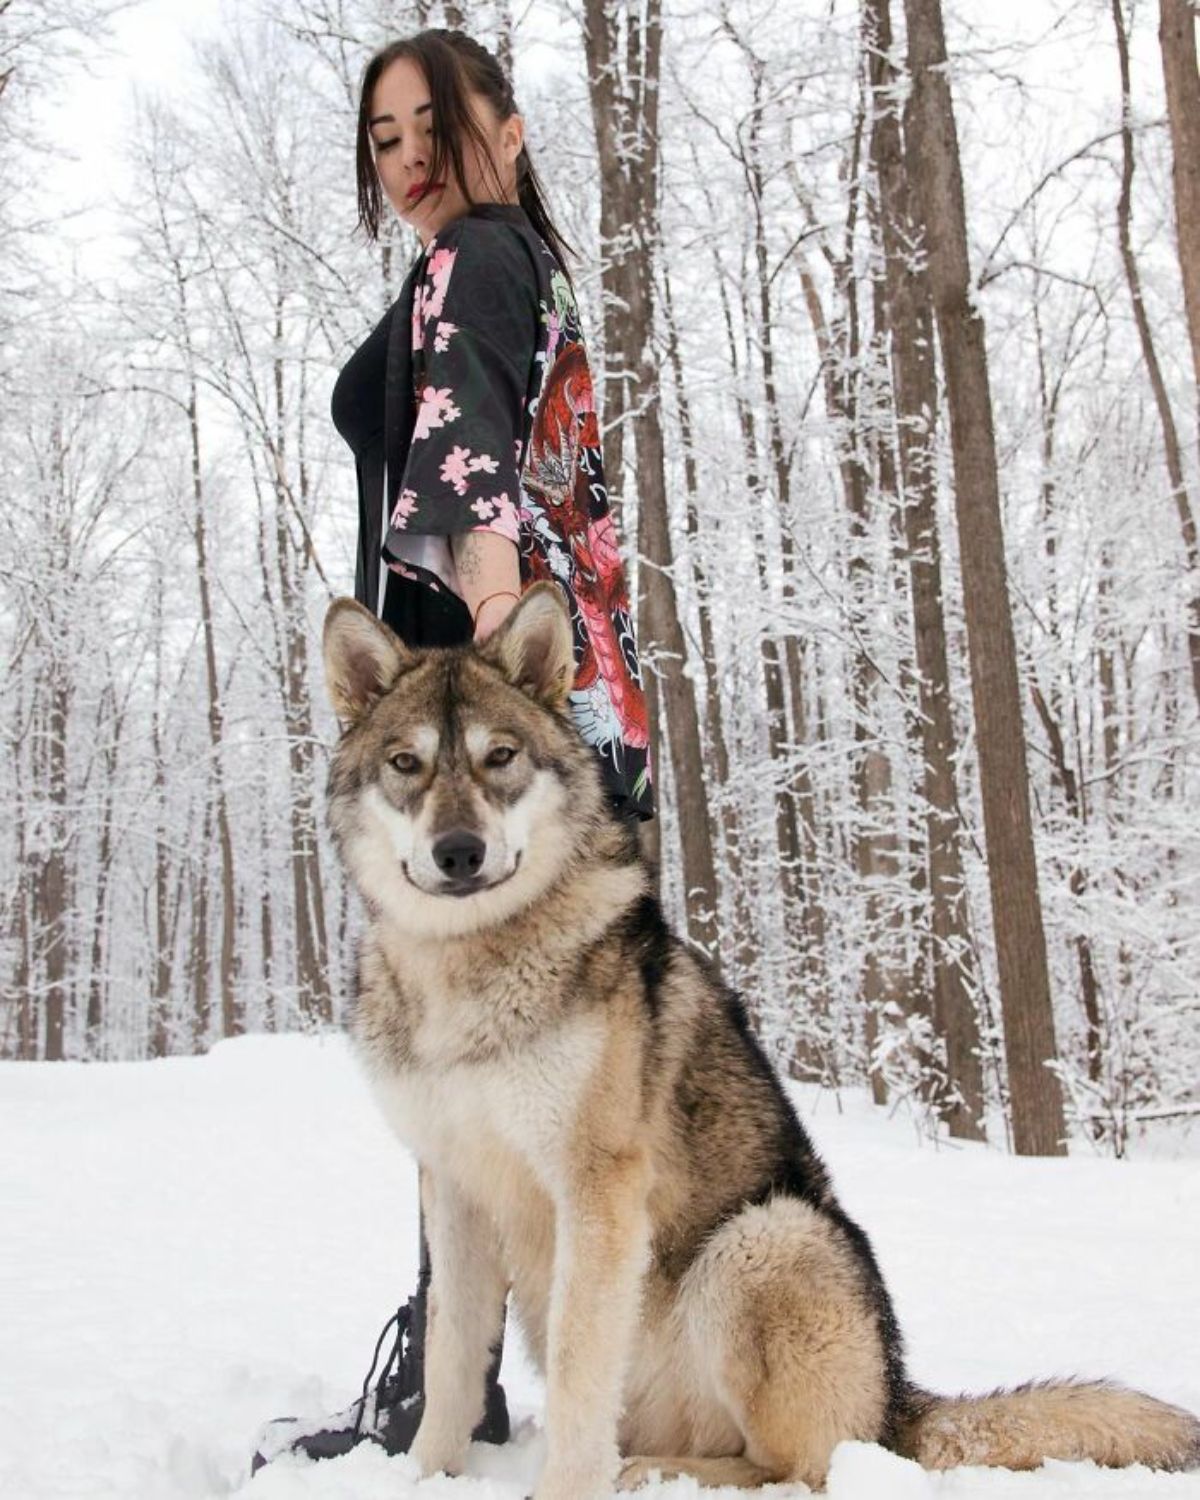 wolf sitting in the snow next to a woman in black